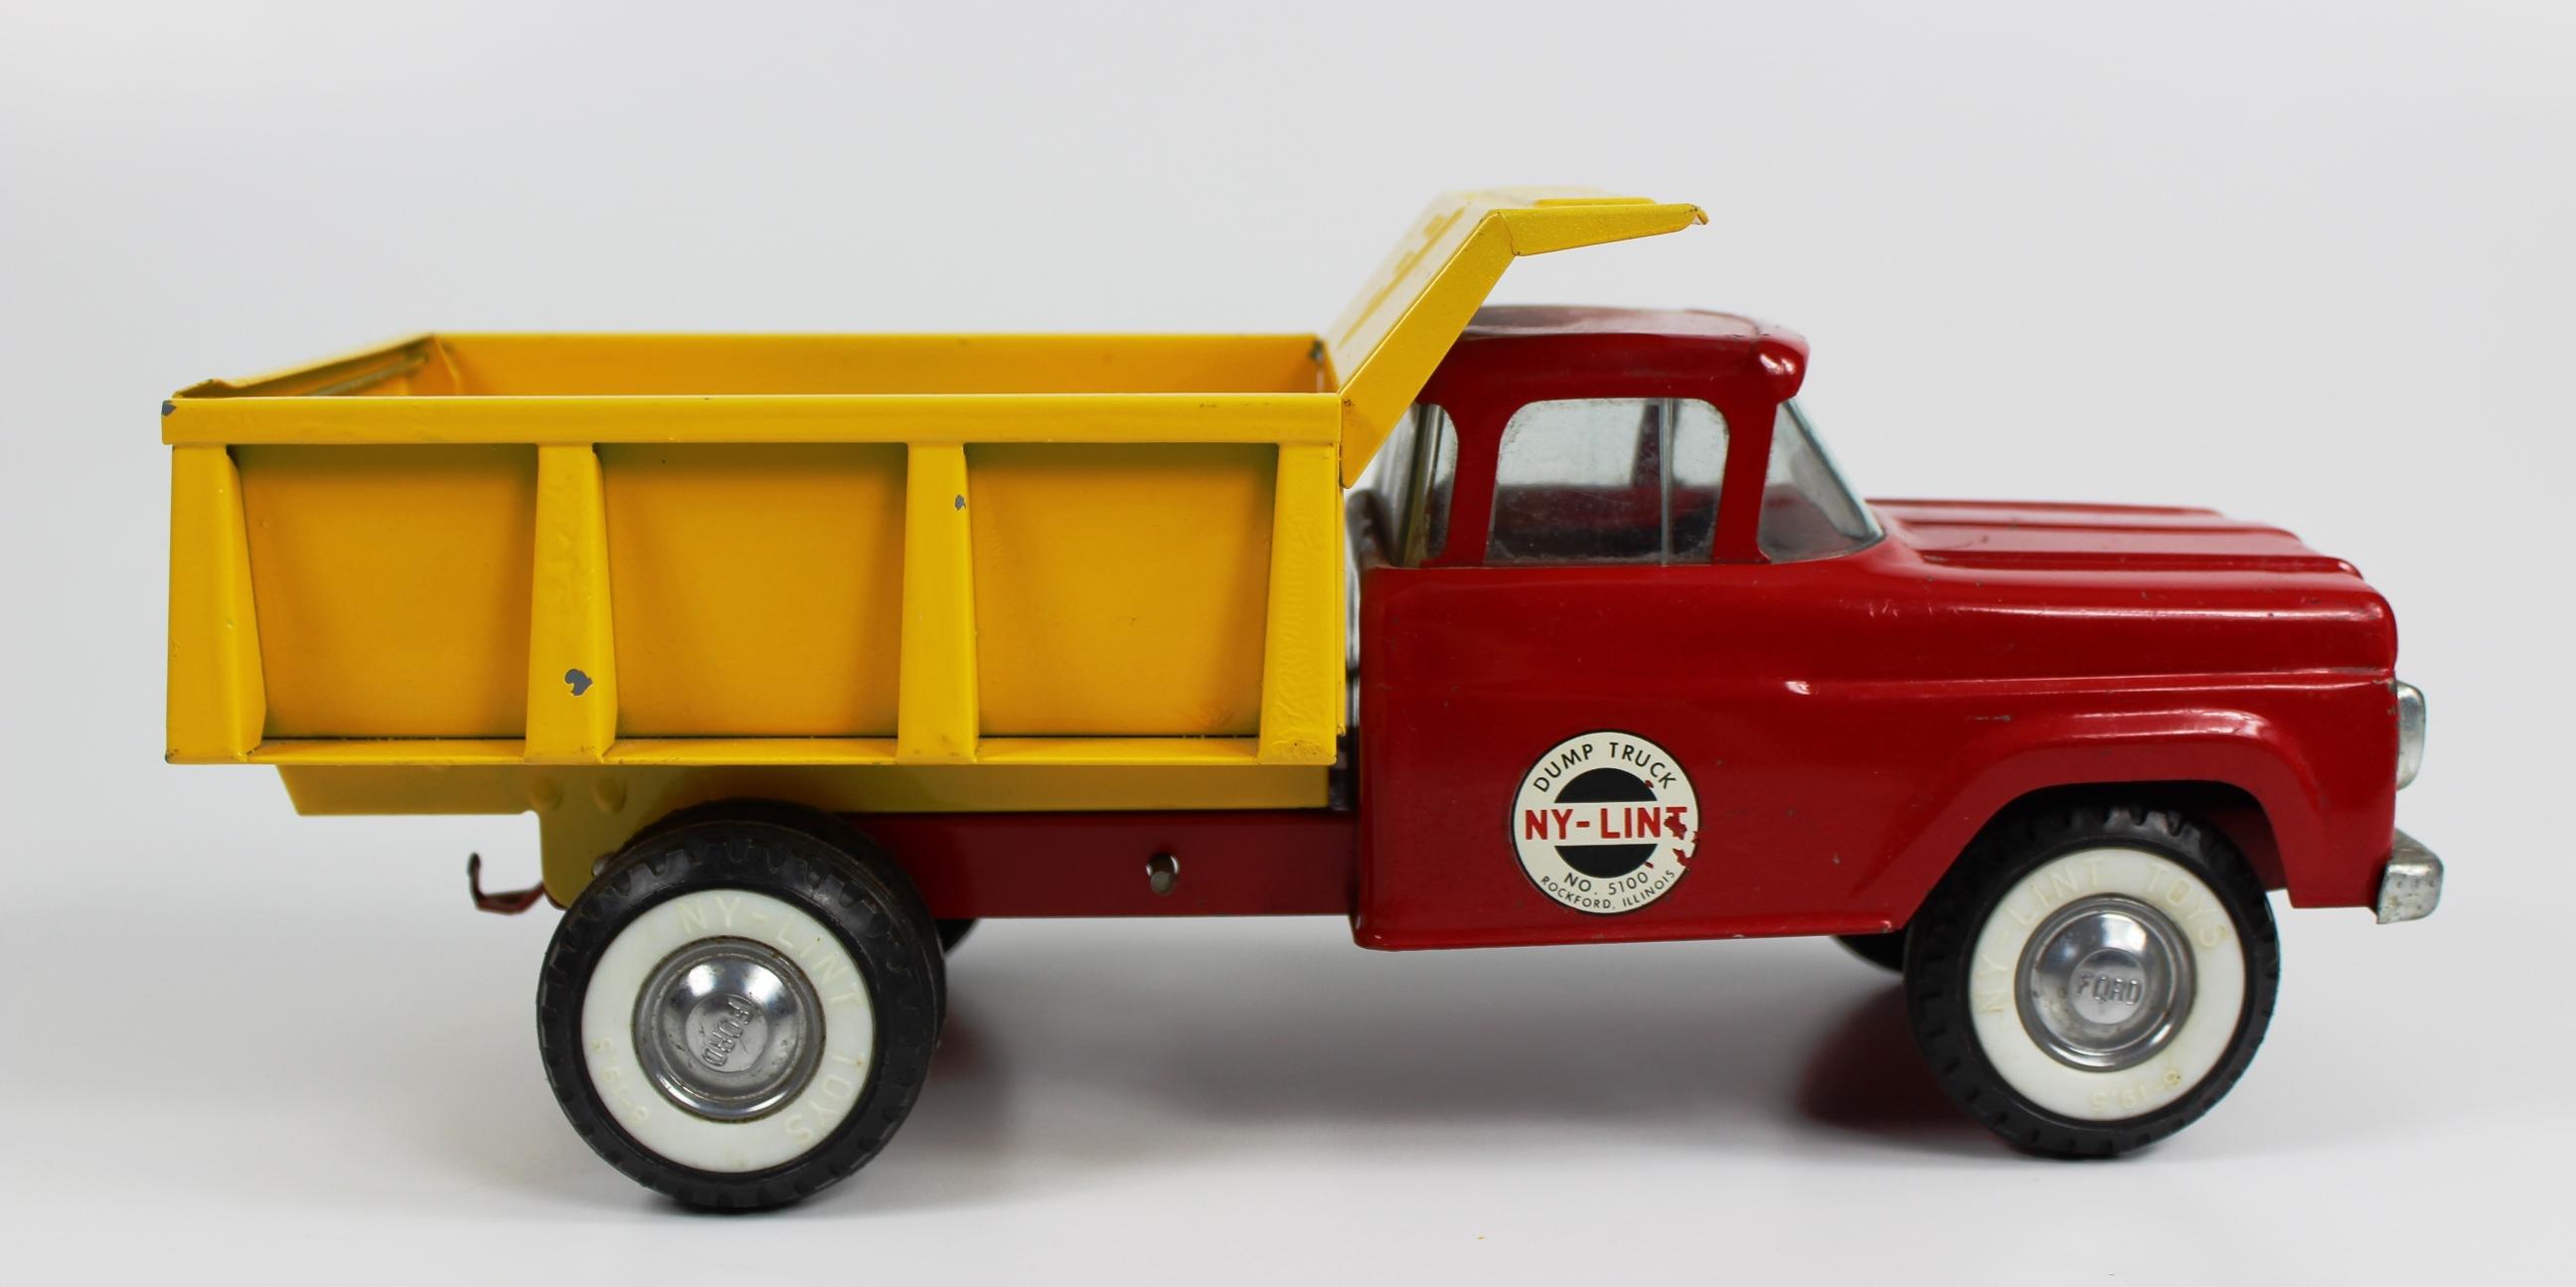 VINTAGE NY-LINT NO. 5100 YELLOW AND RED DUMP TRUCK